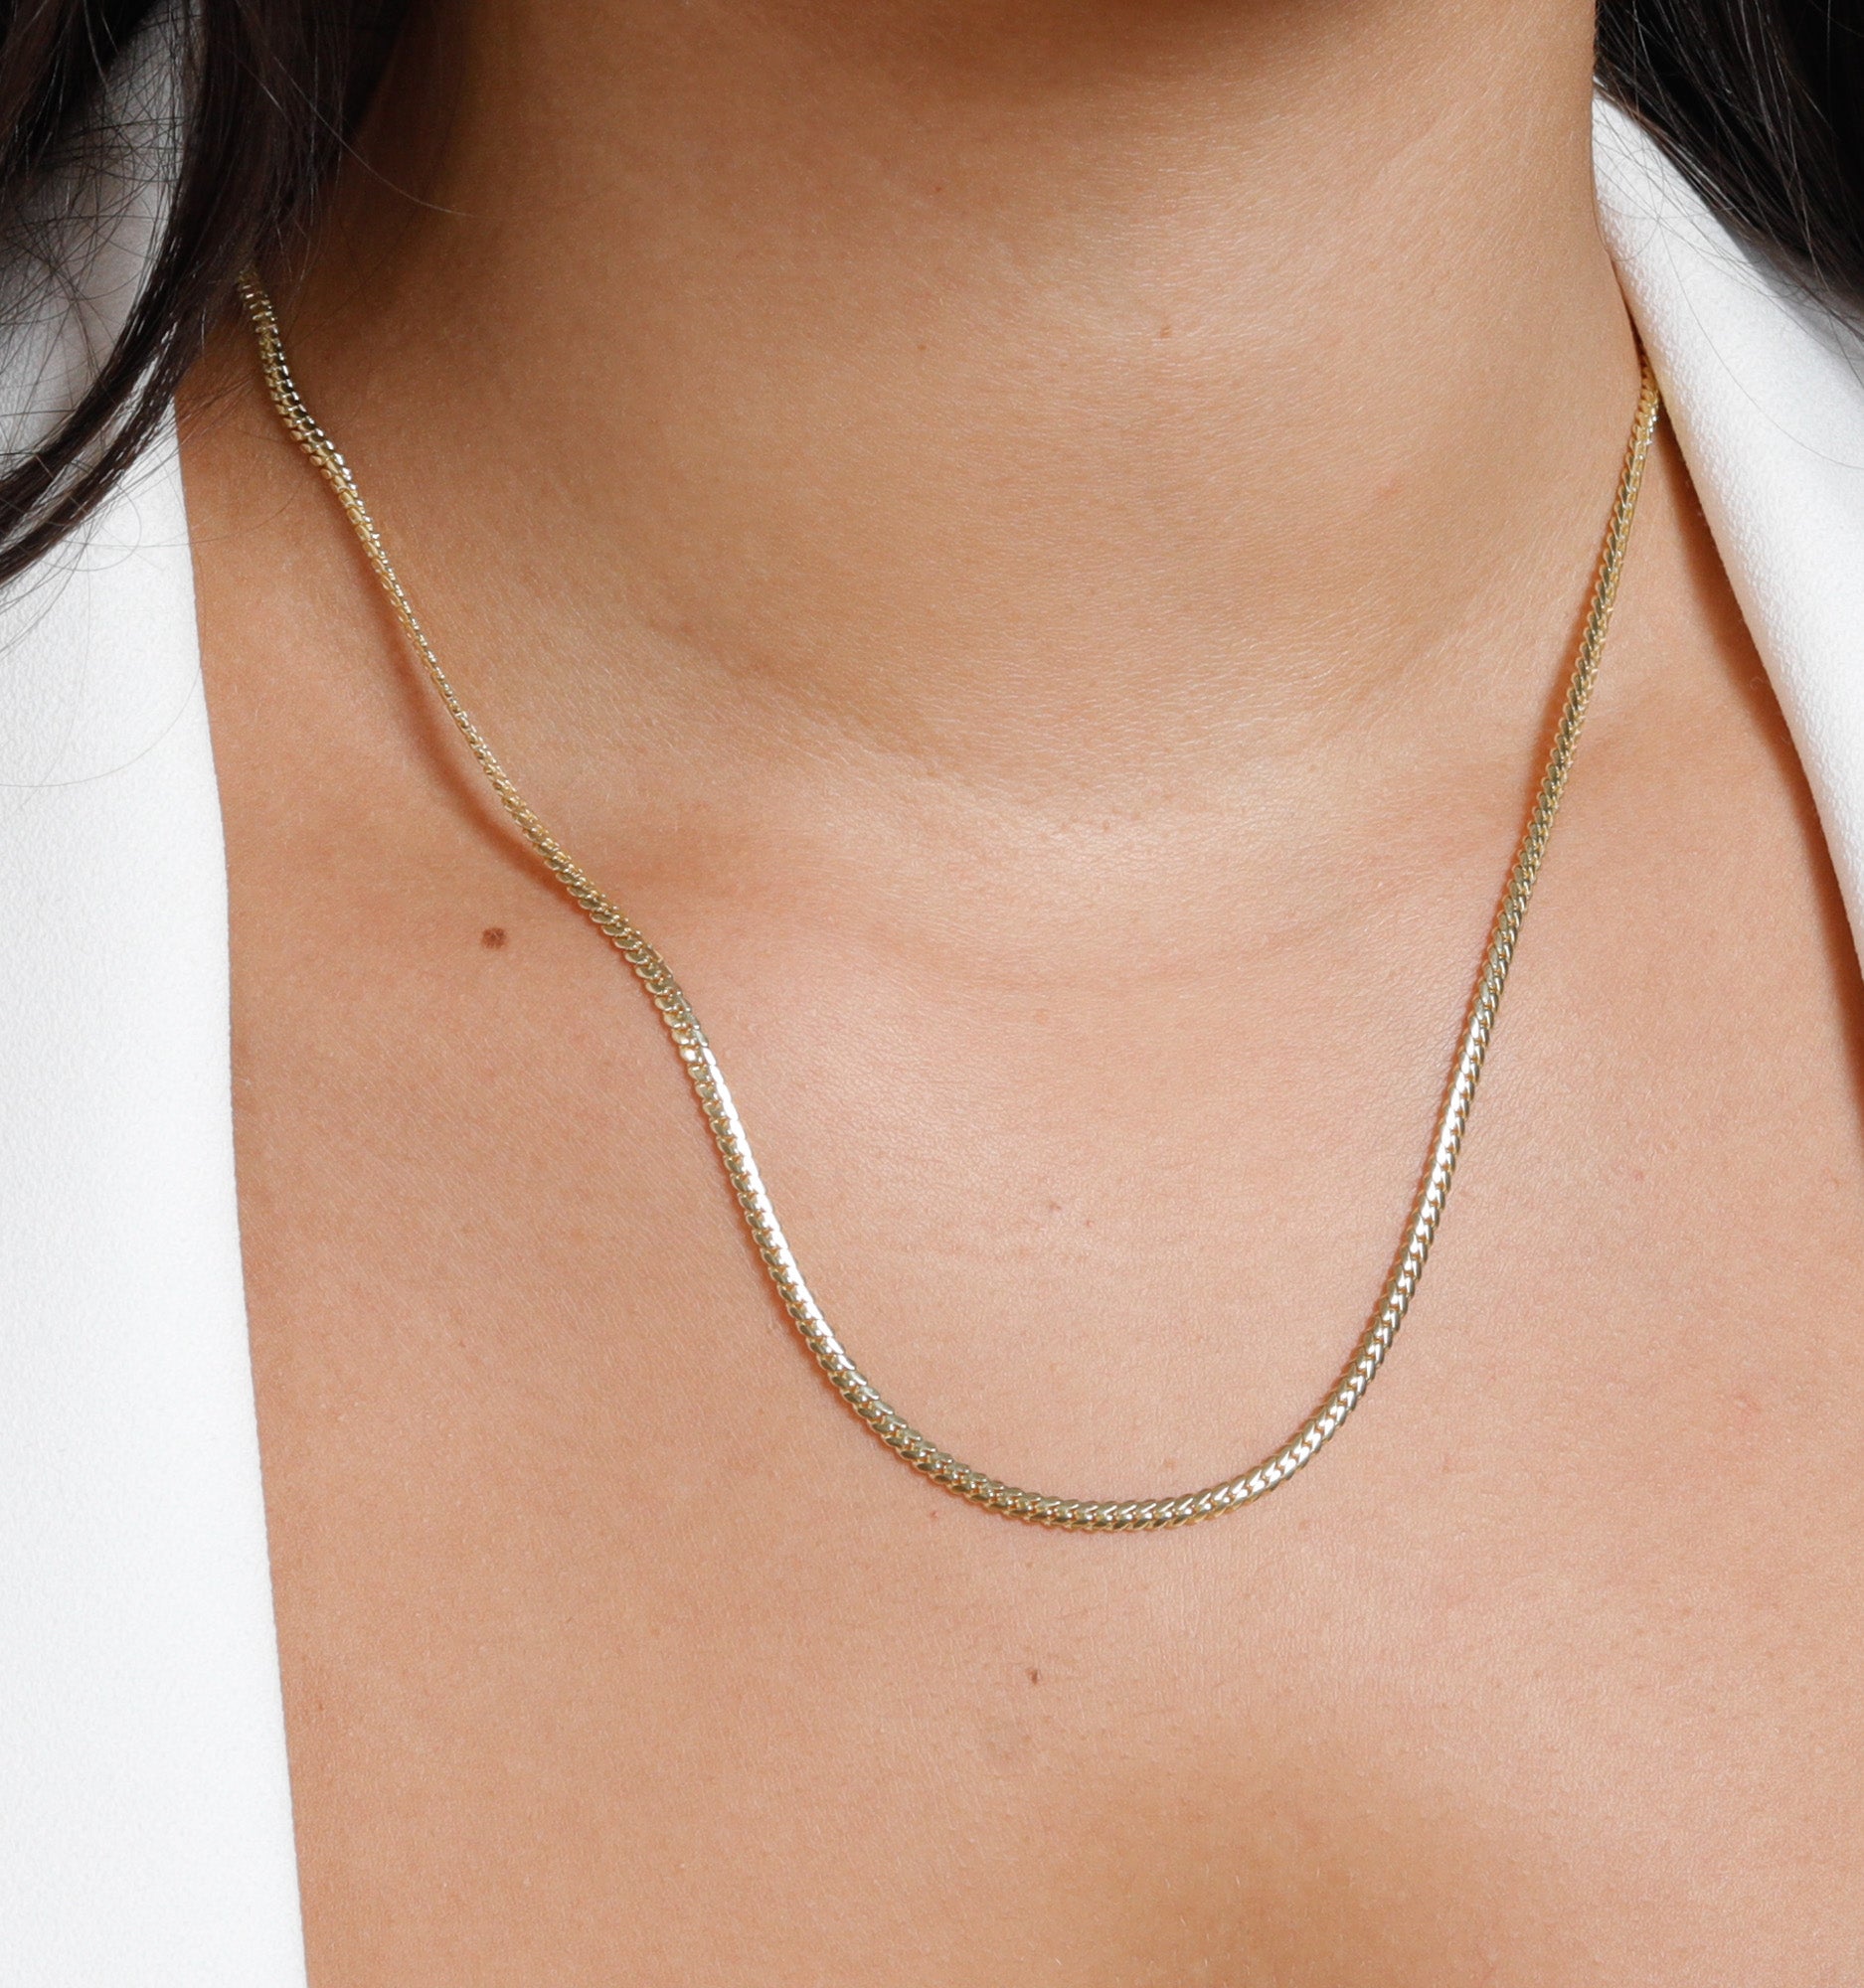 Solid Miami Cuban Chain Necklace In 14K Solid Gold